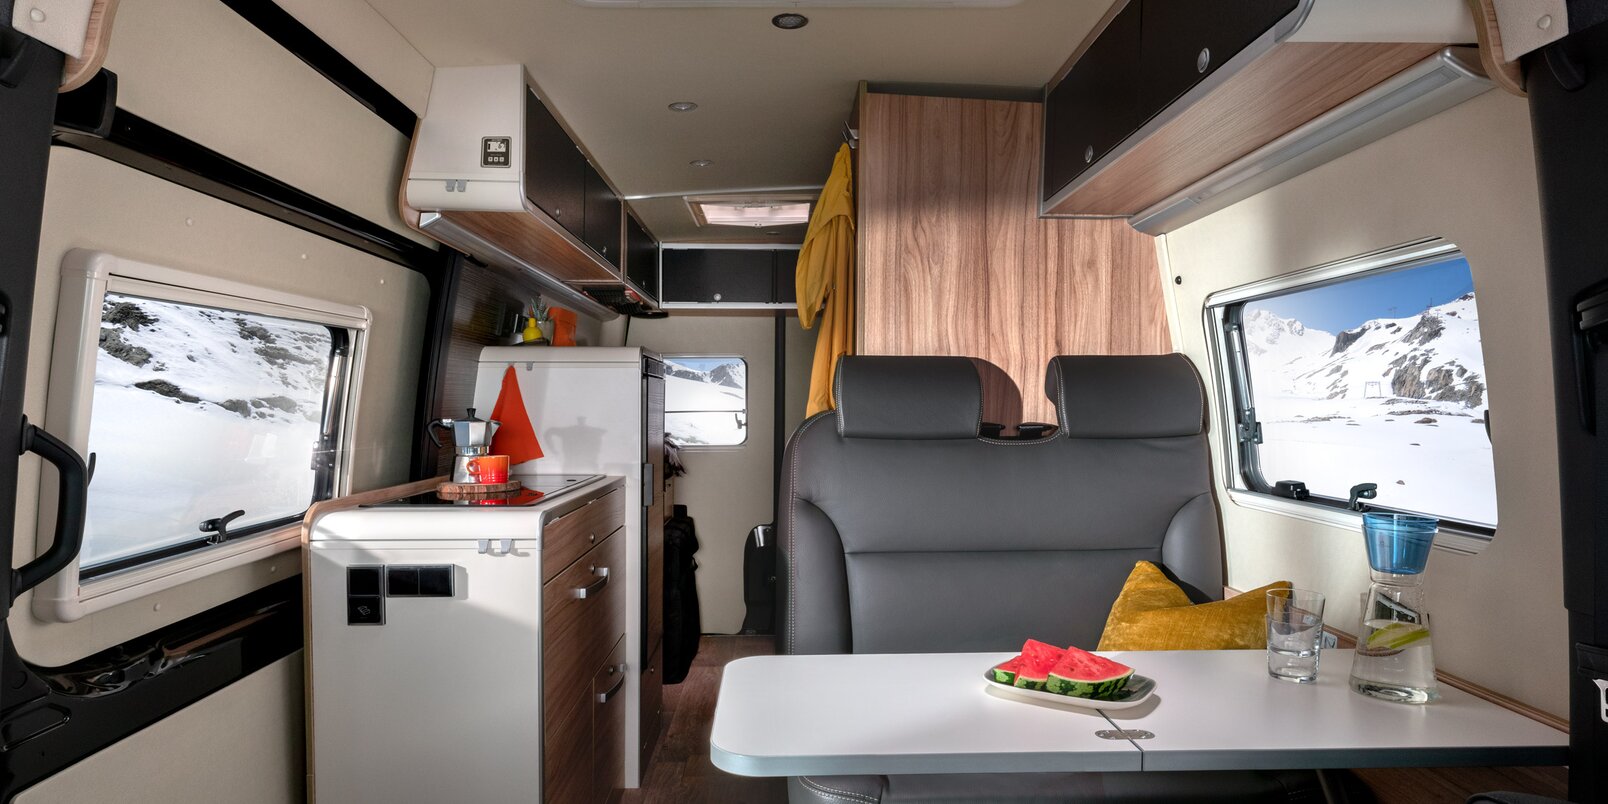 Interior in the HYMER Grand Canyon S CrossOver: seating group with occupied table, kitchen area, rear area